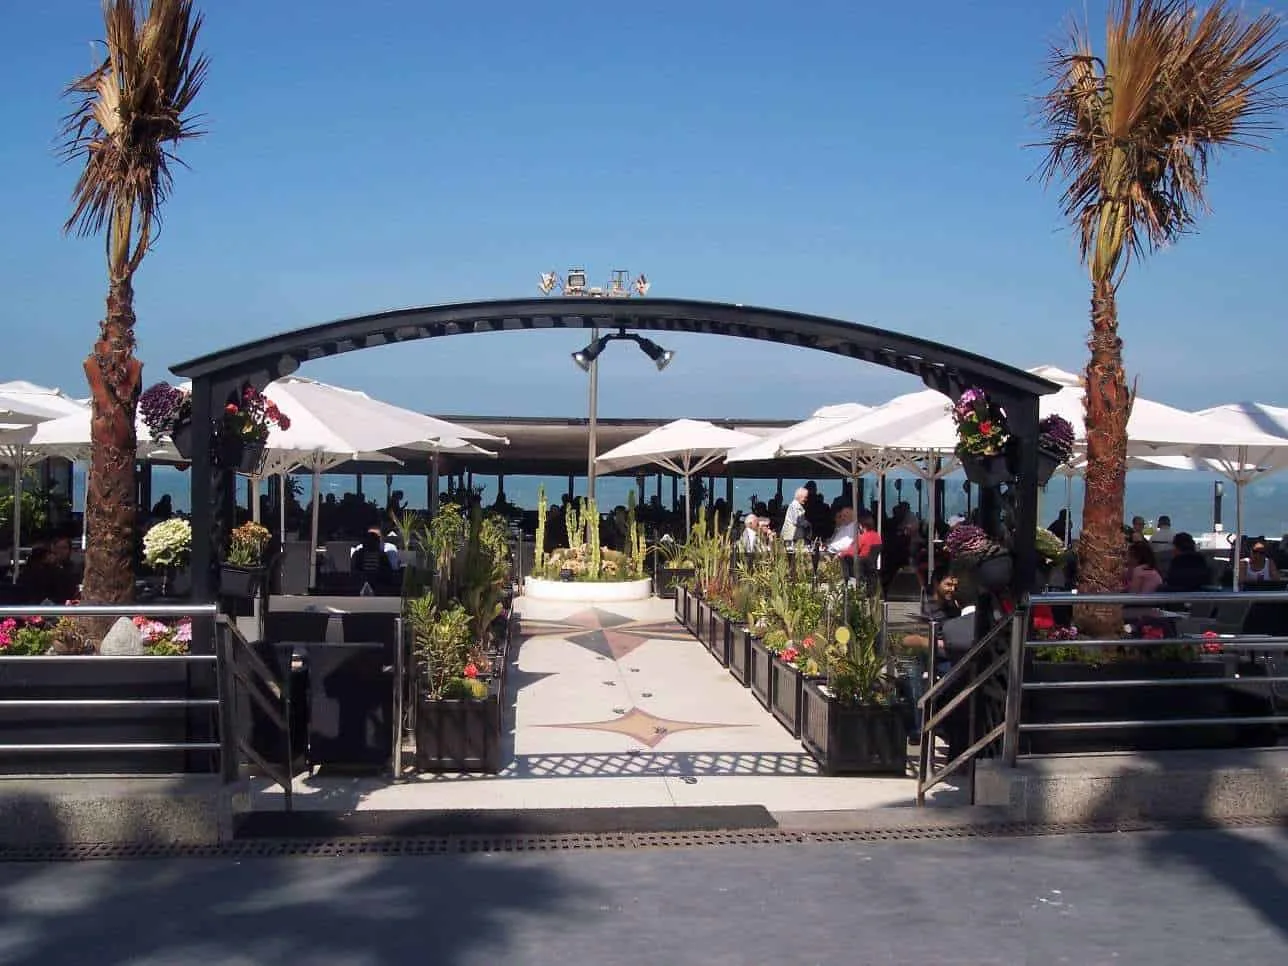 A walkway under an arch with restaurant tables with umbrellas on both sides in Corniche, Casablanca, Morocco.
